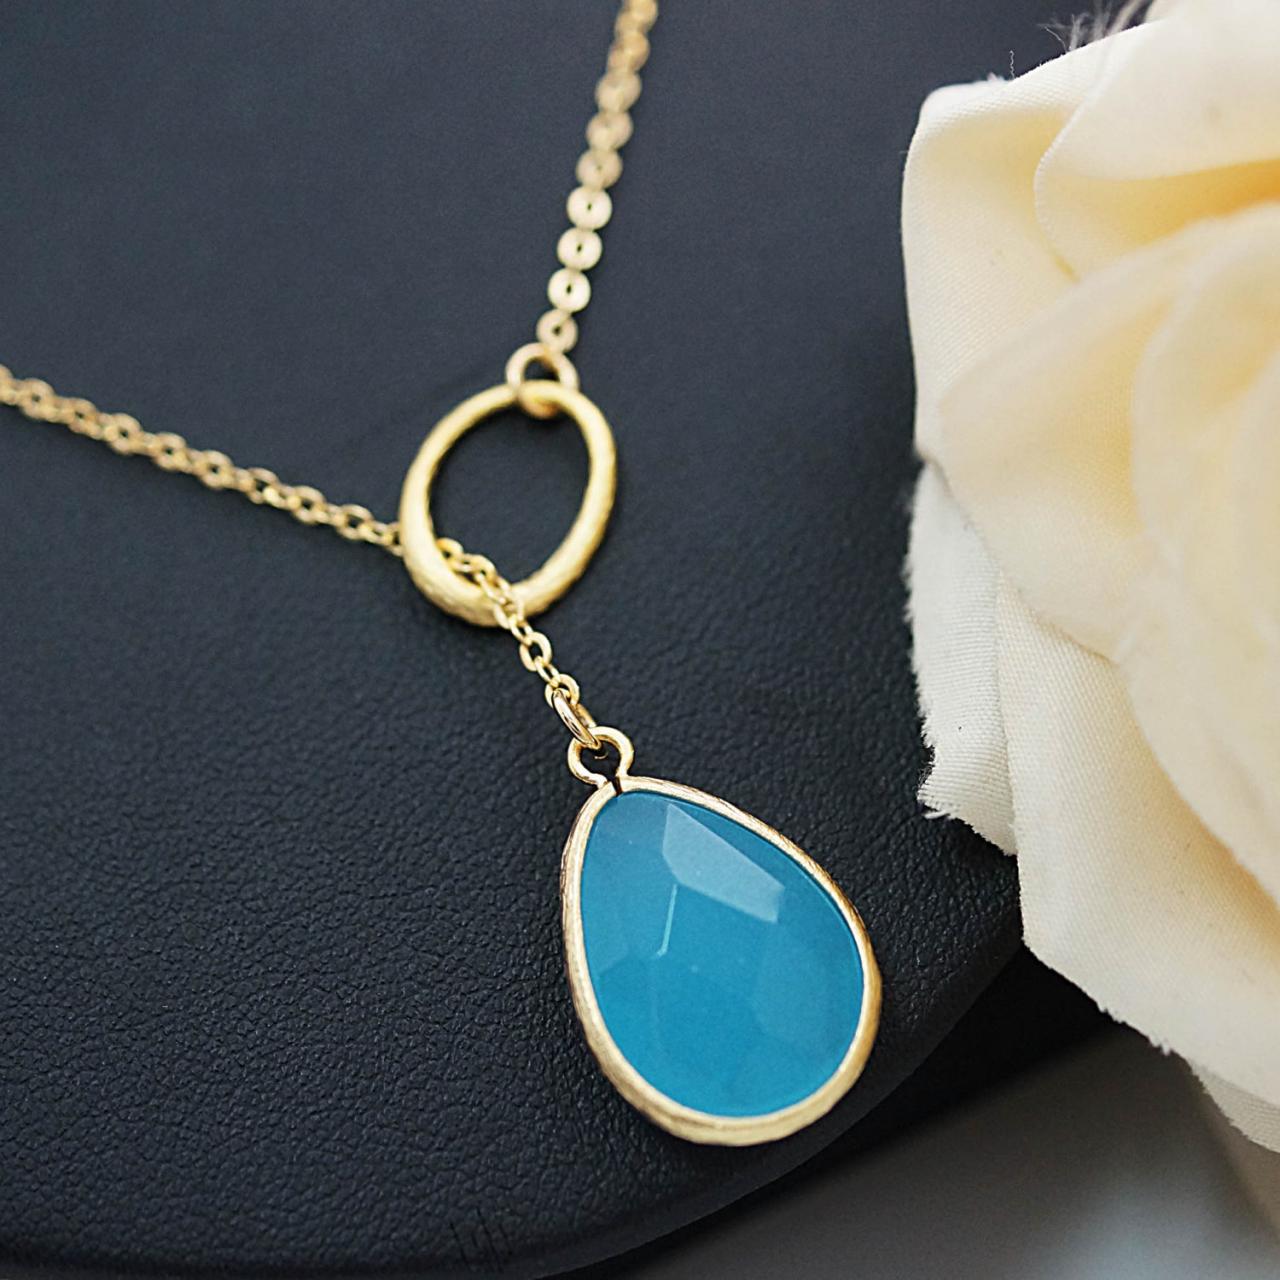 Oval Charm With Sky Blue Glass Necklace , Bridesmaid Gift, Wedding Jewelry, Bridesmaid Necklace, Christmas Gift For Her, Everyday Necklace